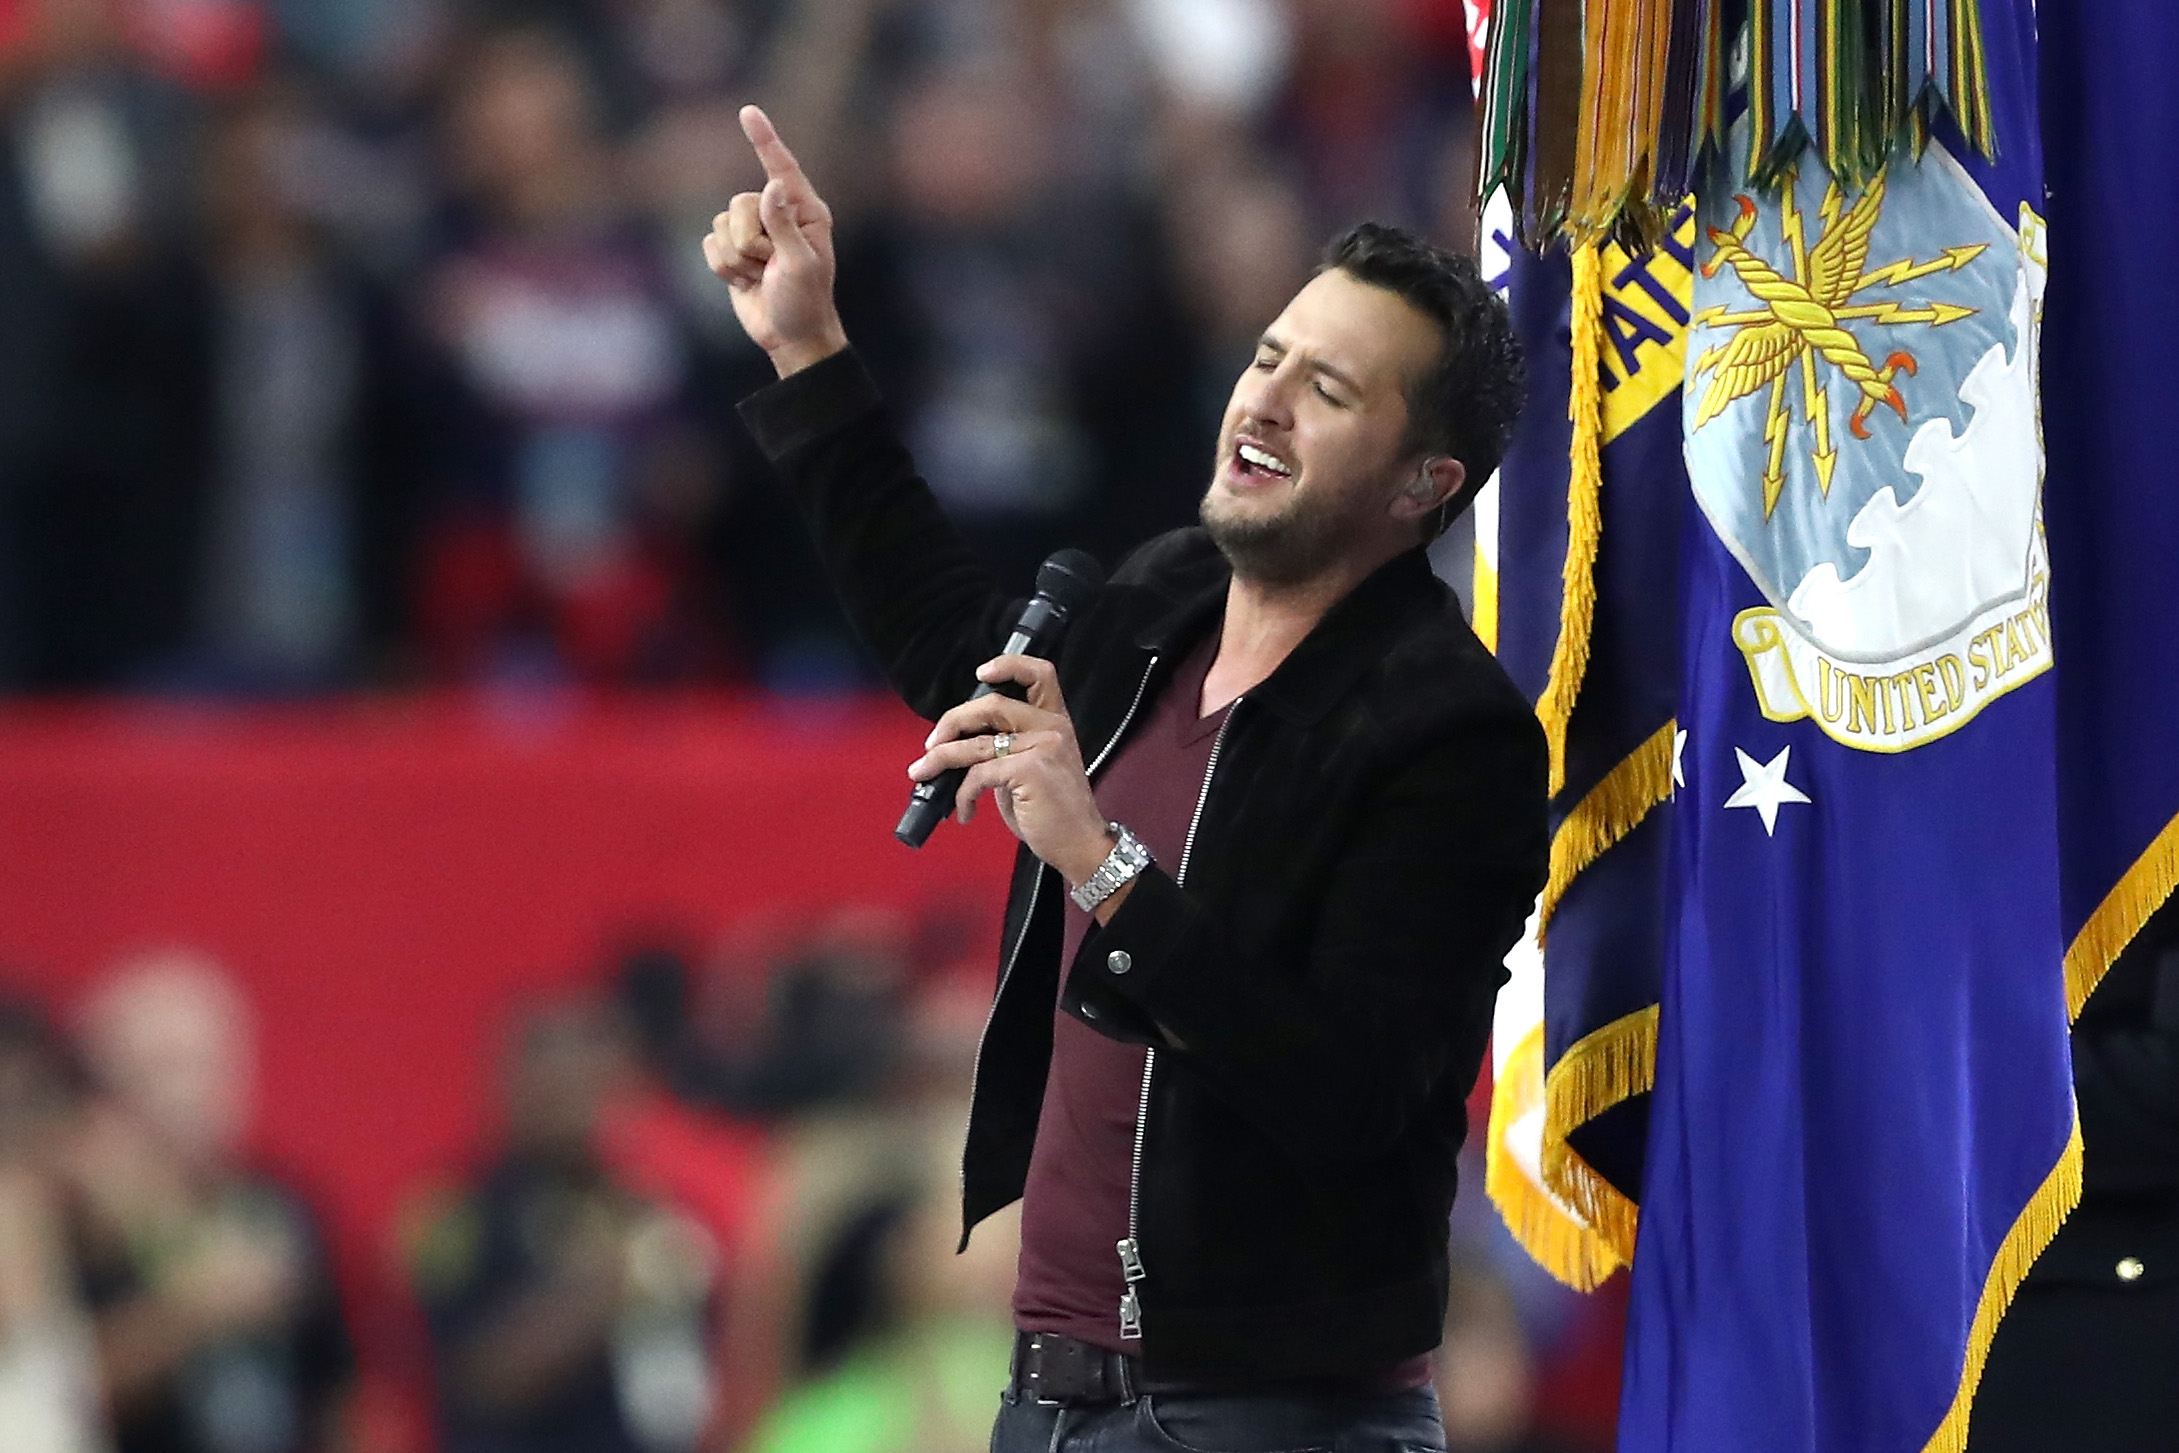 PHOTO: Luke Bryan sings the National Anthem prior to Super Bowl 51 between the New England Patriots and the Atlanta Falcons at NRG Stadium on Feb. 5, 2017 in Houston, Texas.